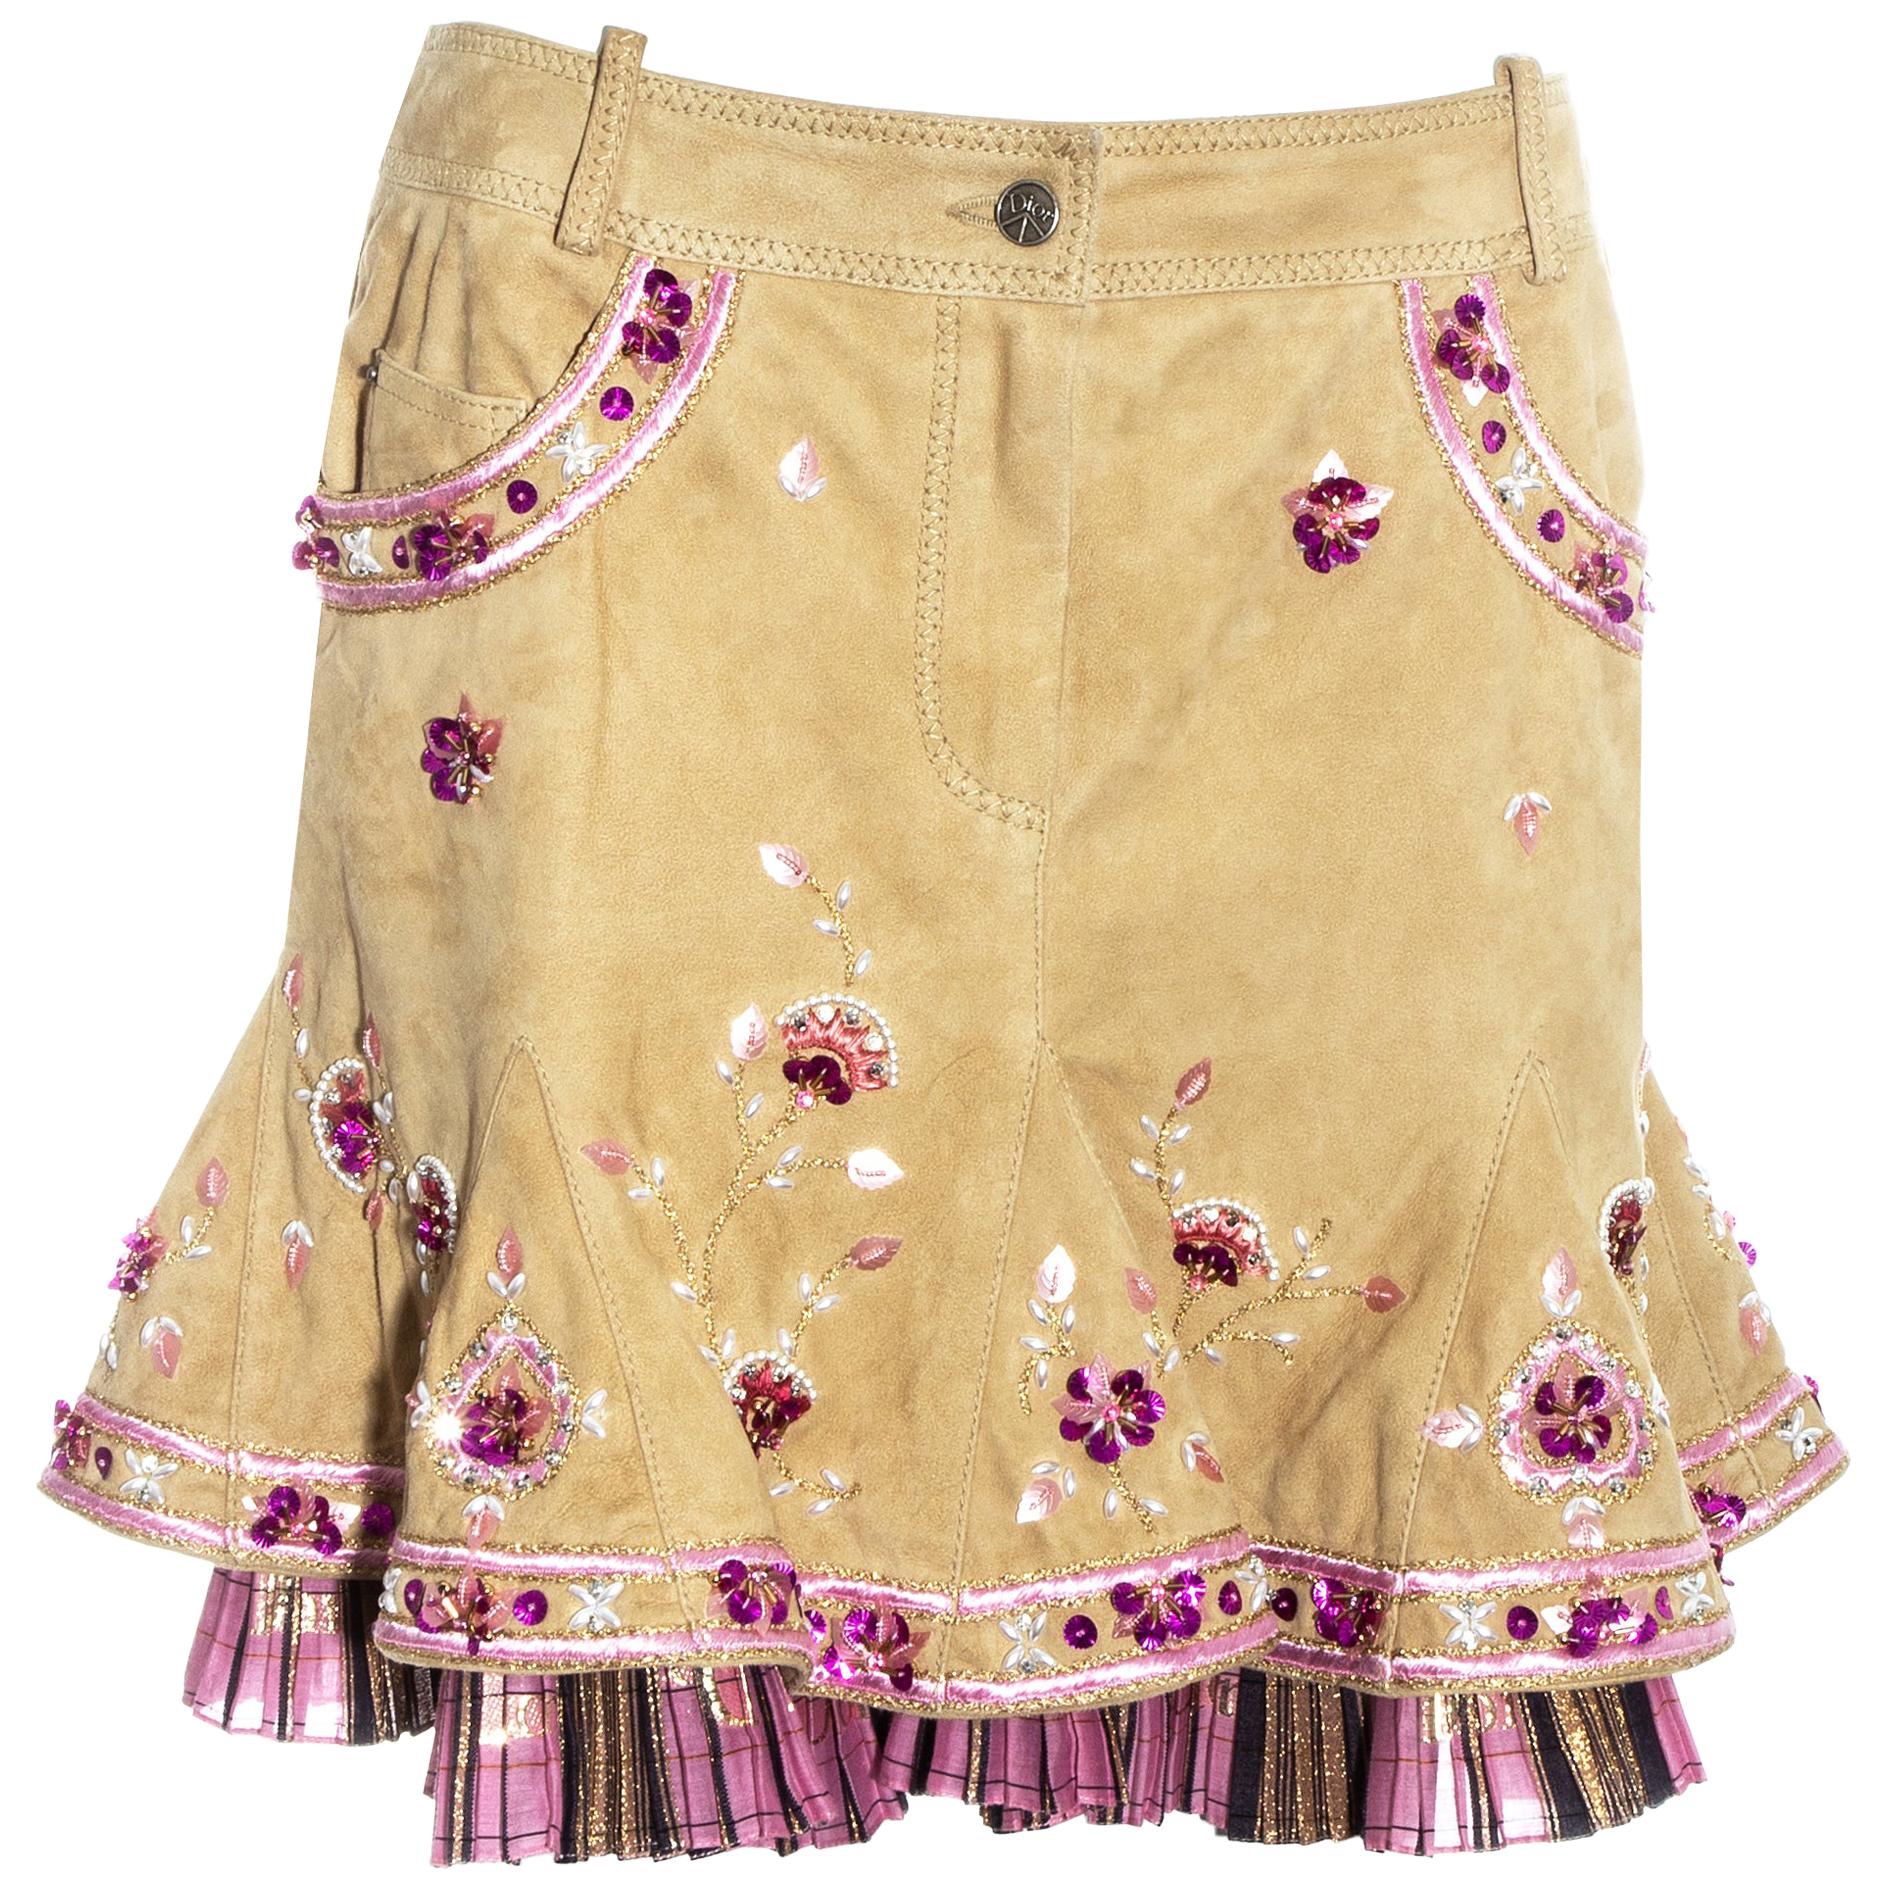 Christian Dior by John Galliano pink and cream suede embroidered skirt, ss 2005